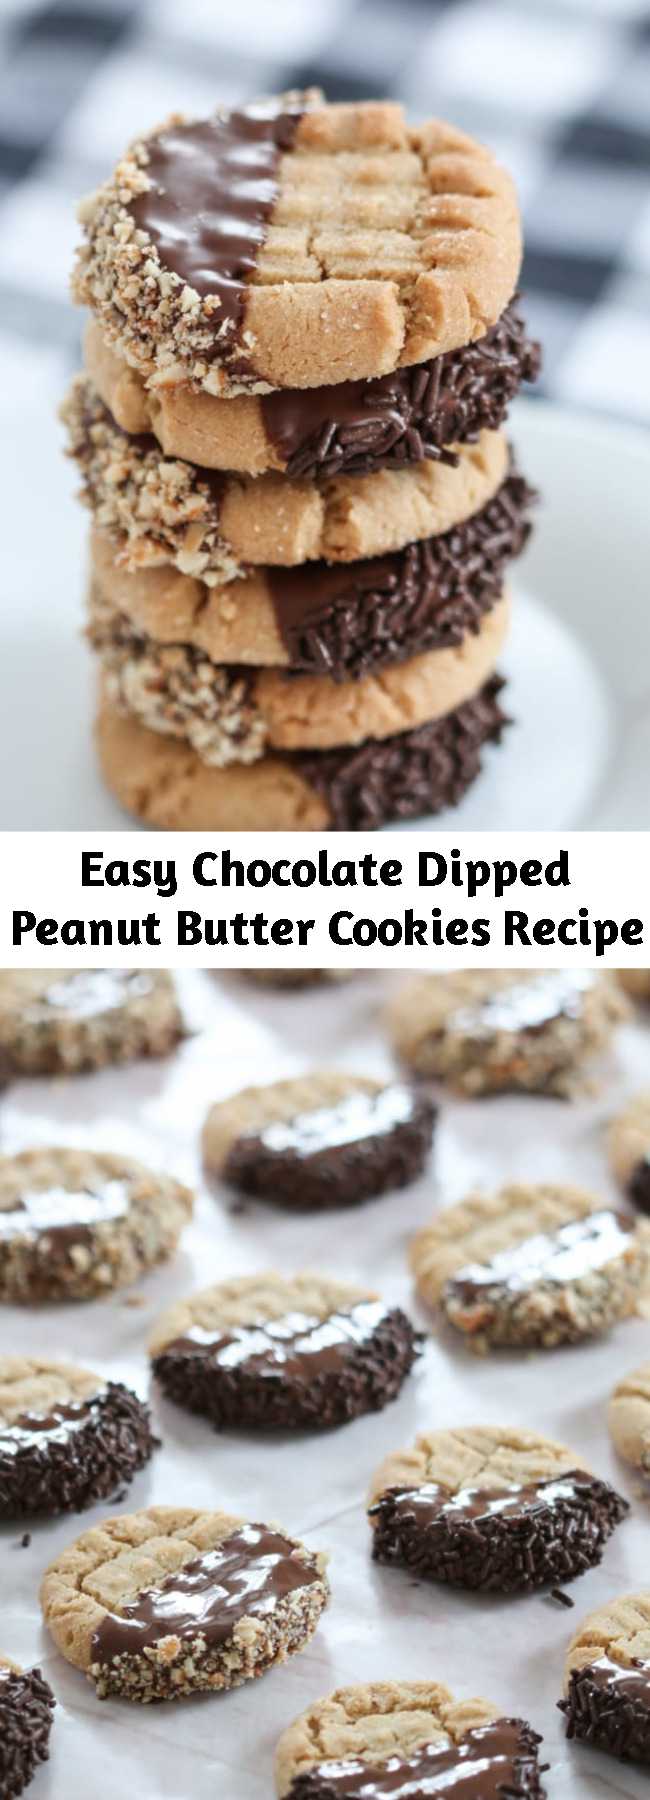 Easy Chocolate Dipped Peanut Butter Cookies Recipe - I’m convinced that you can dip anything in chocolate and instantly make it taste more delicious and look expertly styled and totally fancy. Don’t believe me? Feel free to prove me wrong. And while it might take a bit more time, it’s really not hard to do.